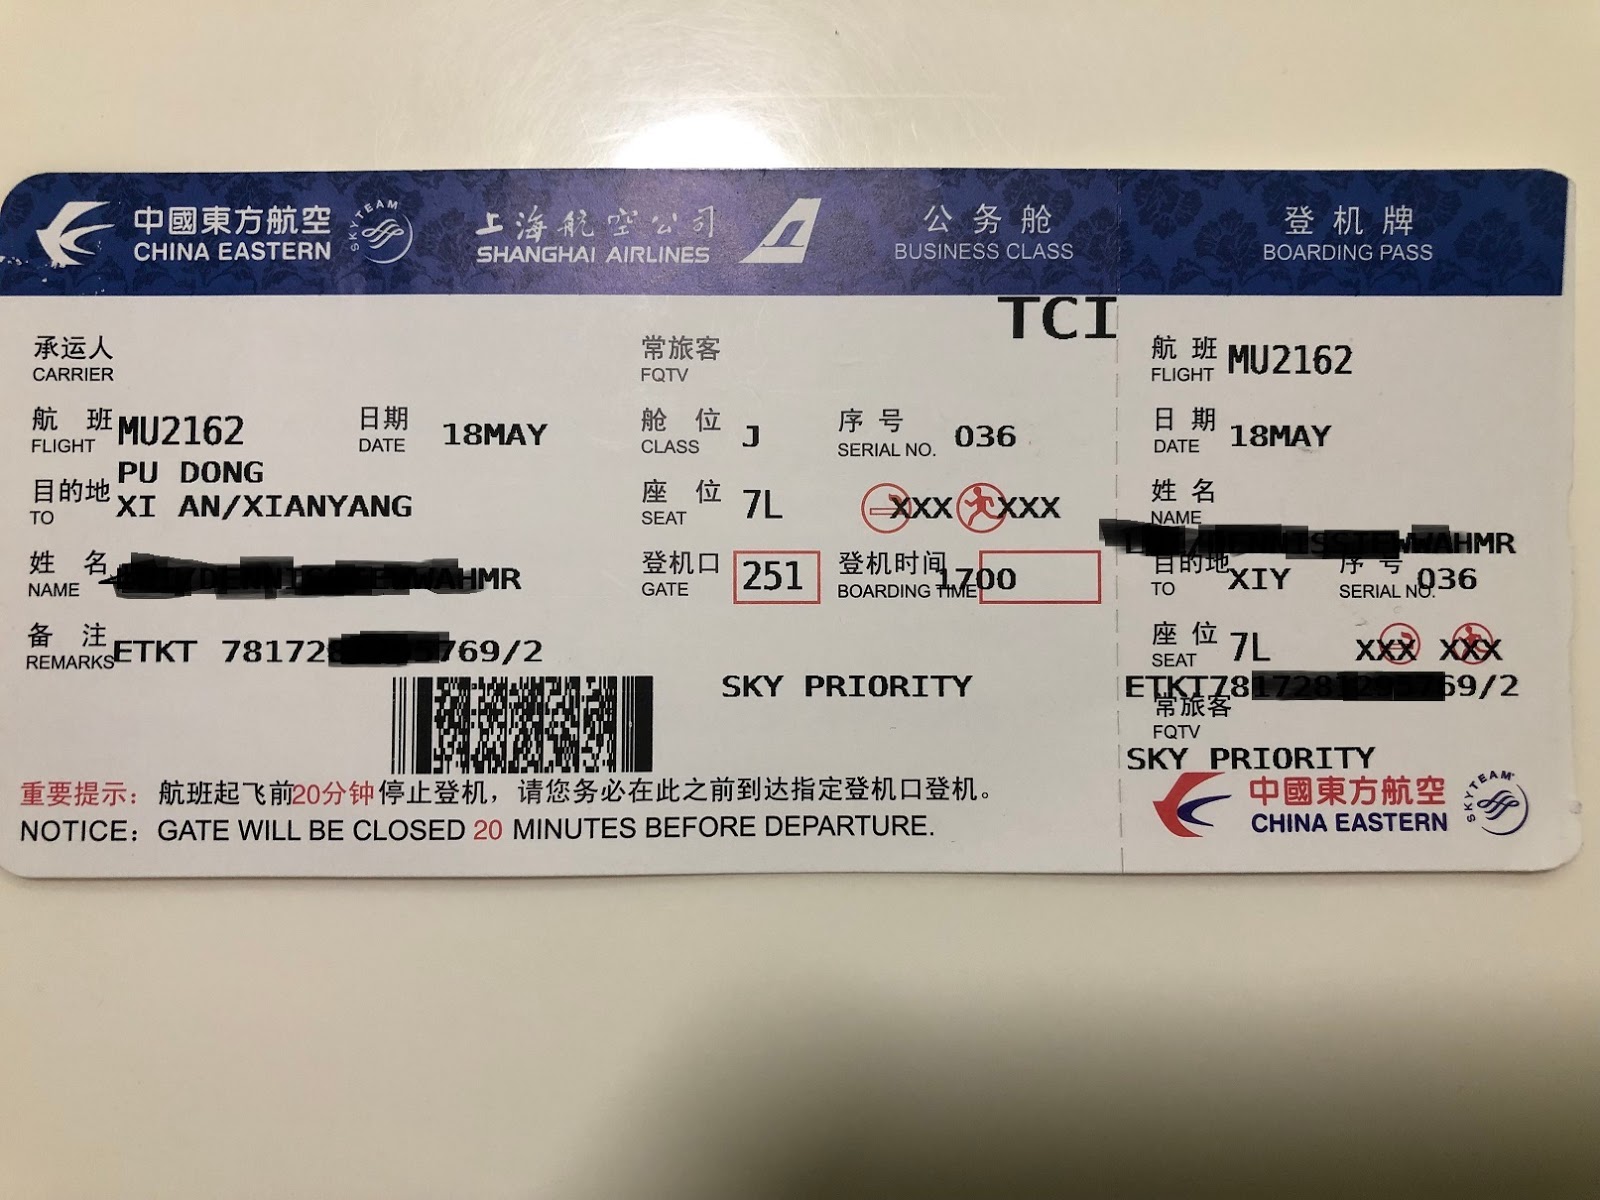 Guitar 123 Singapore Food and Travel Blog! China Eastern Airlines Business Class Adventure